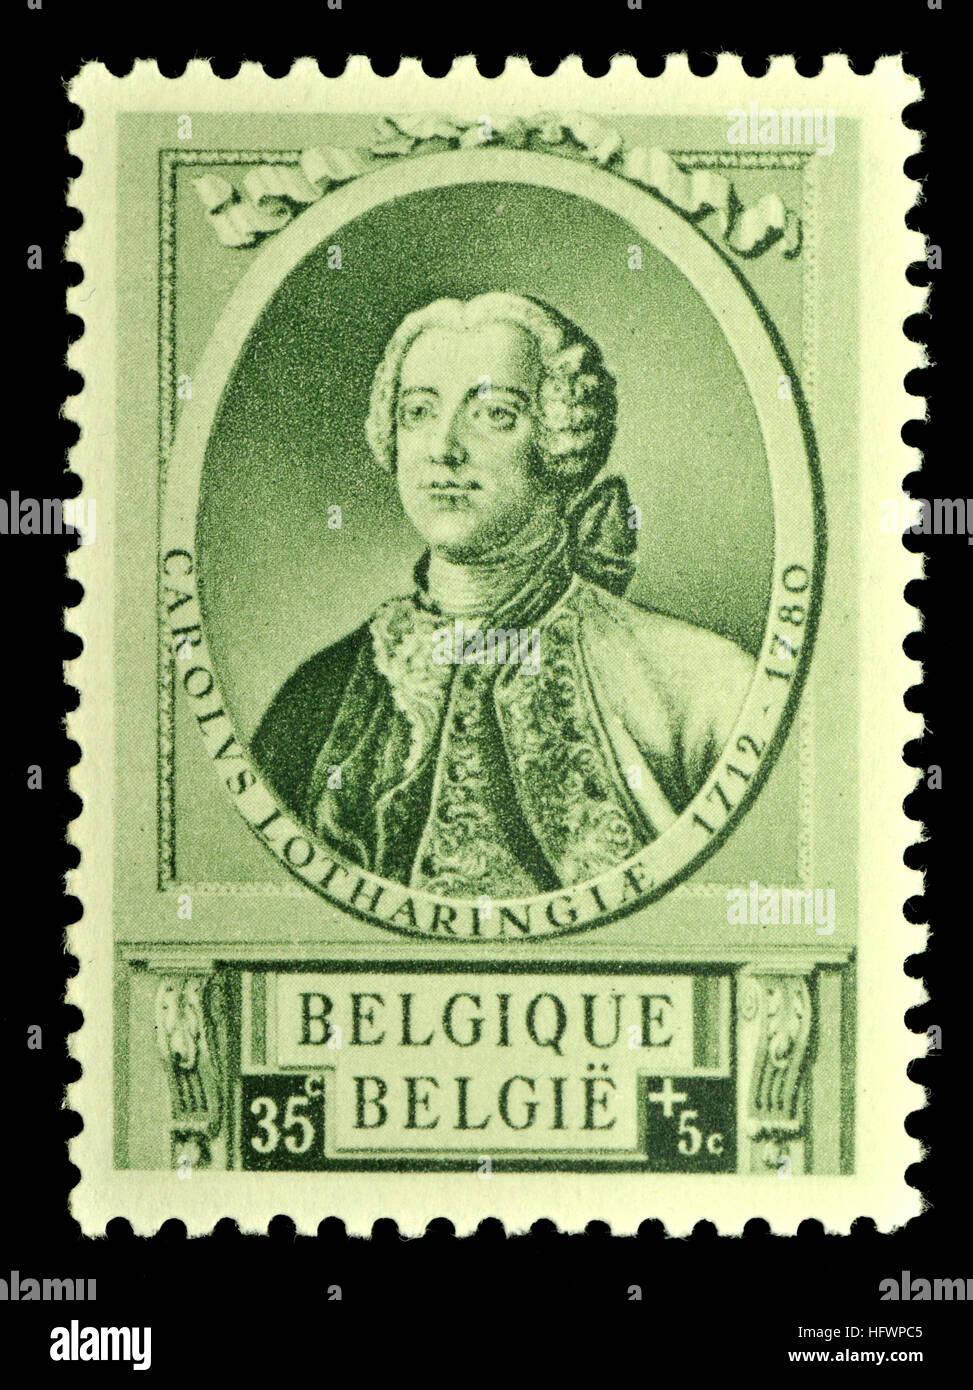 Belgian postage stamp (1941) : Prince Charles Alexander of Lorraine (1712-1780)  Austrian general and soldier, field marshal of the Imperial Army, ... Stock Photo